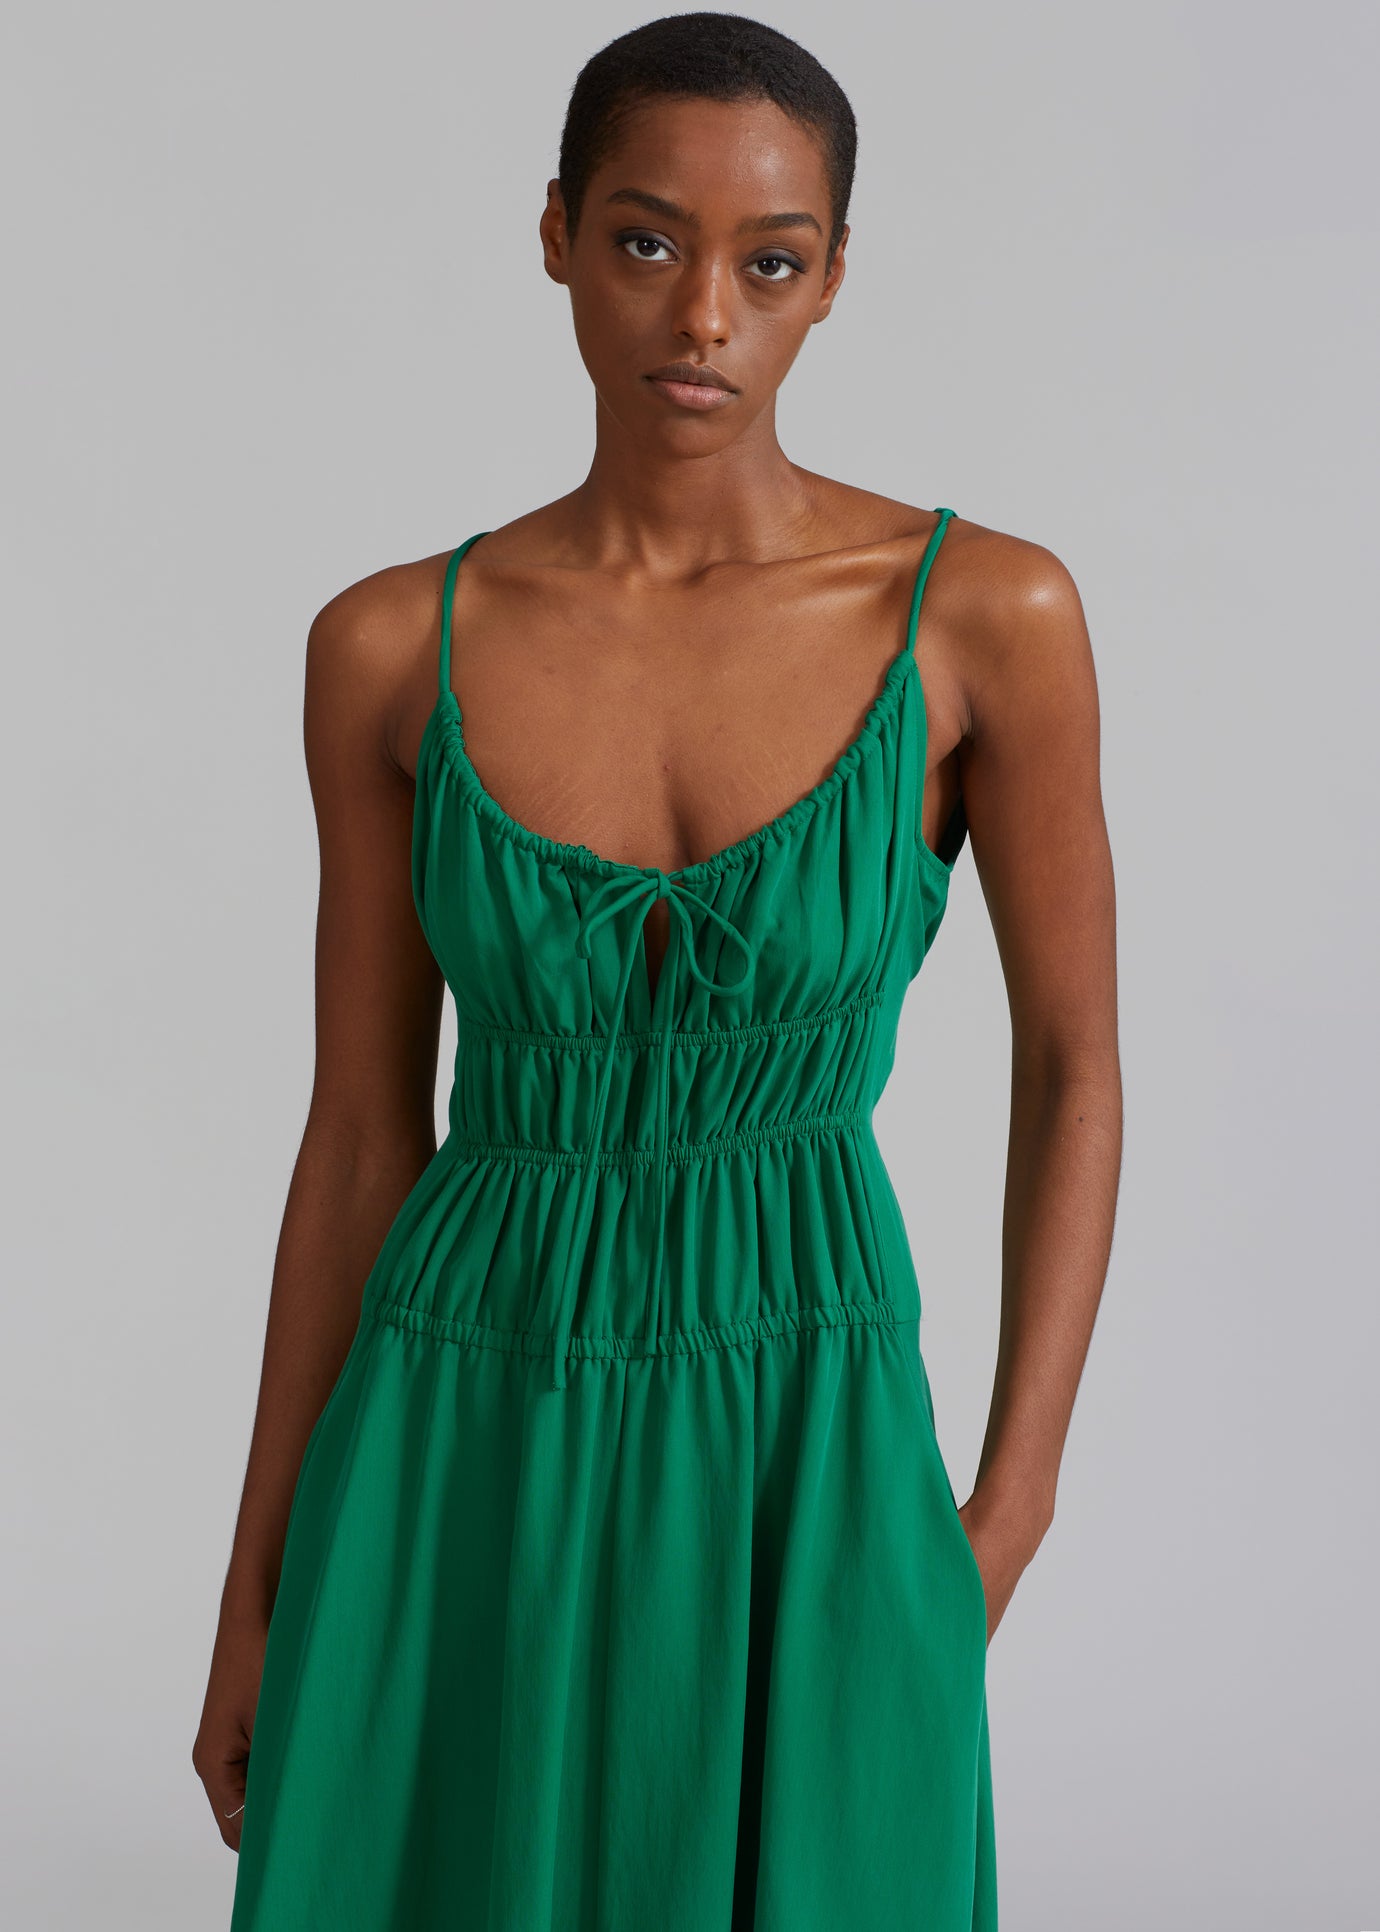 Proenza Schouler White Label Drapey Suiting Ruched Dress - Green - 1